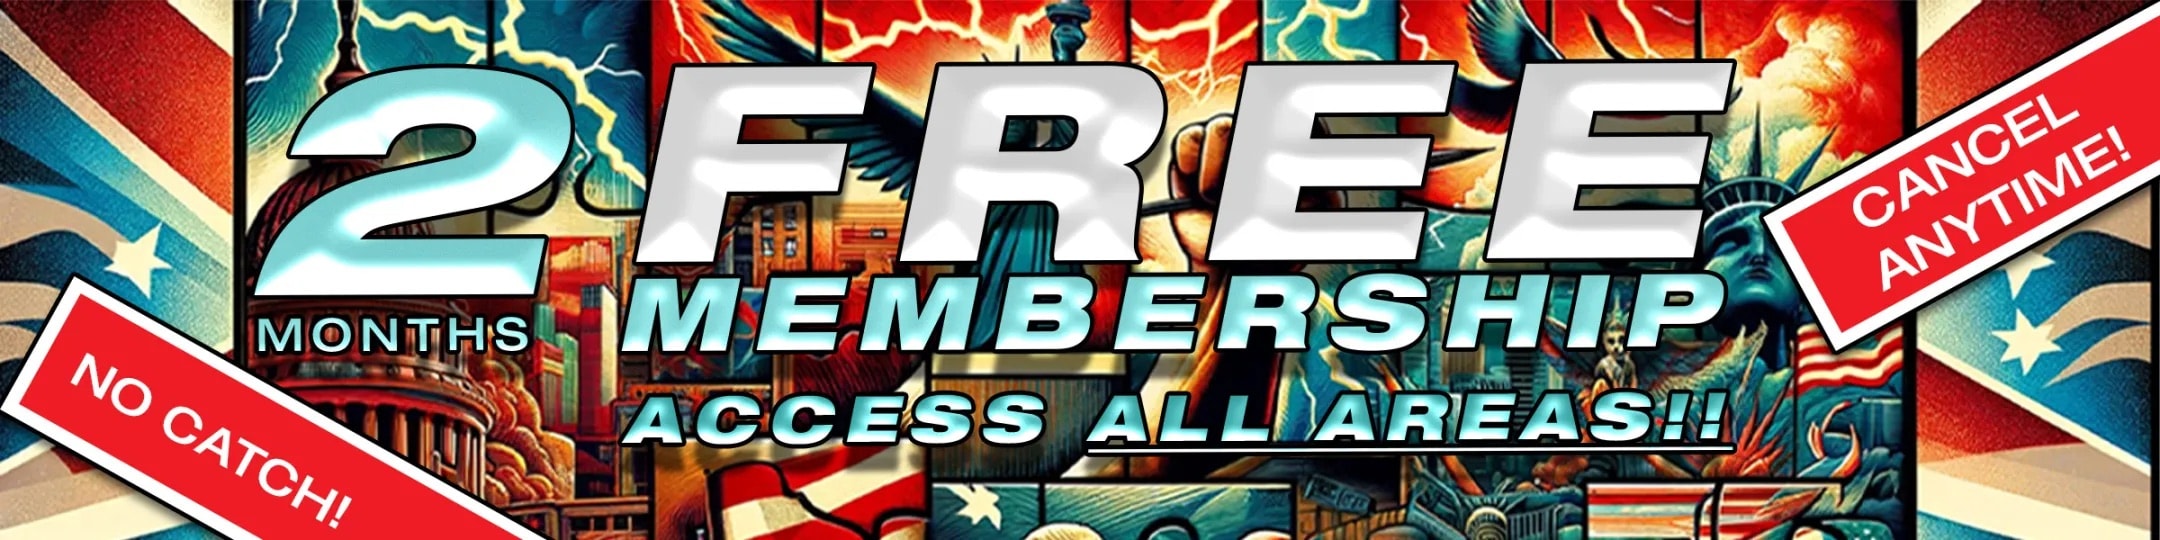 2 Months FREE Membership - Access All Areas!!